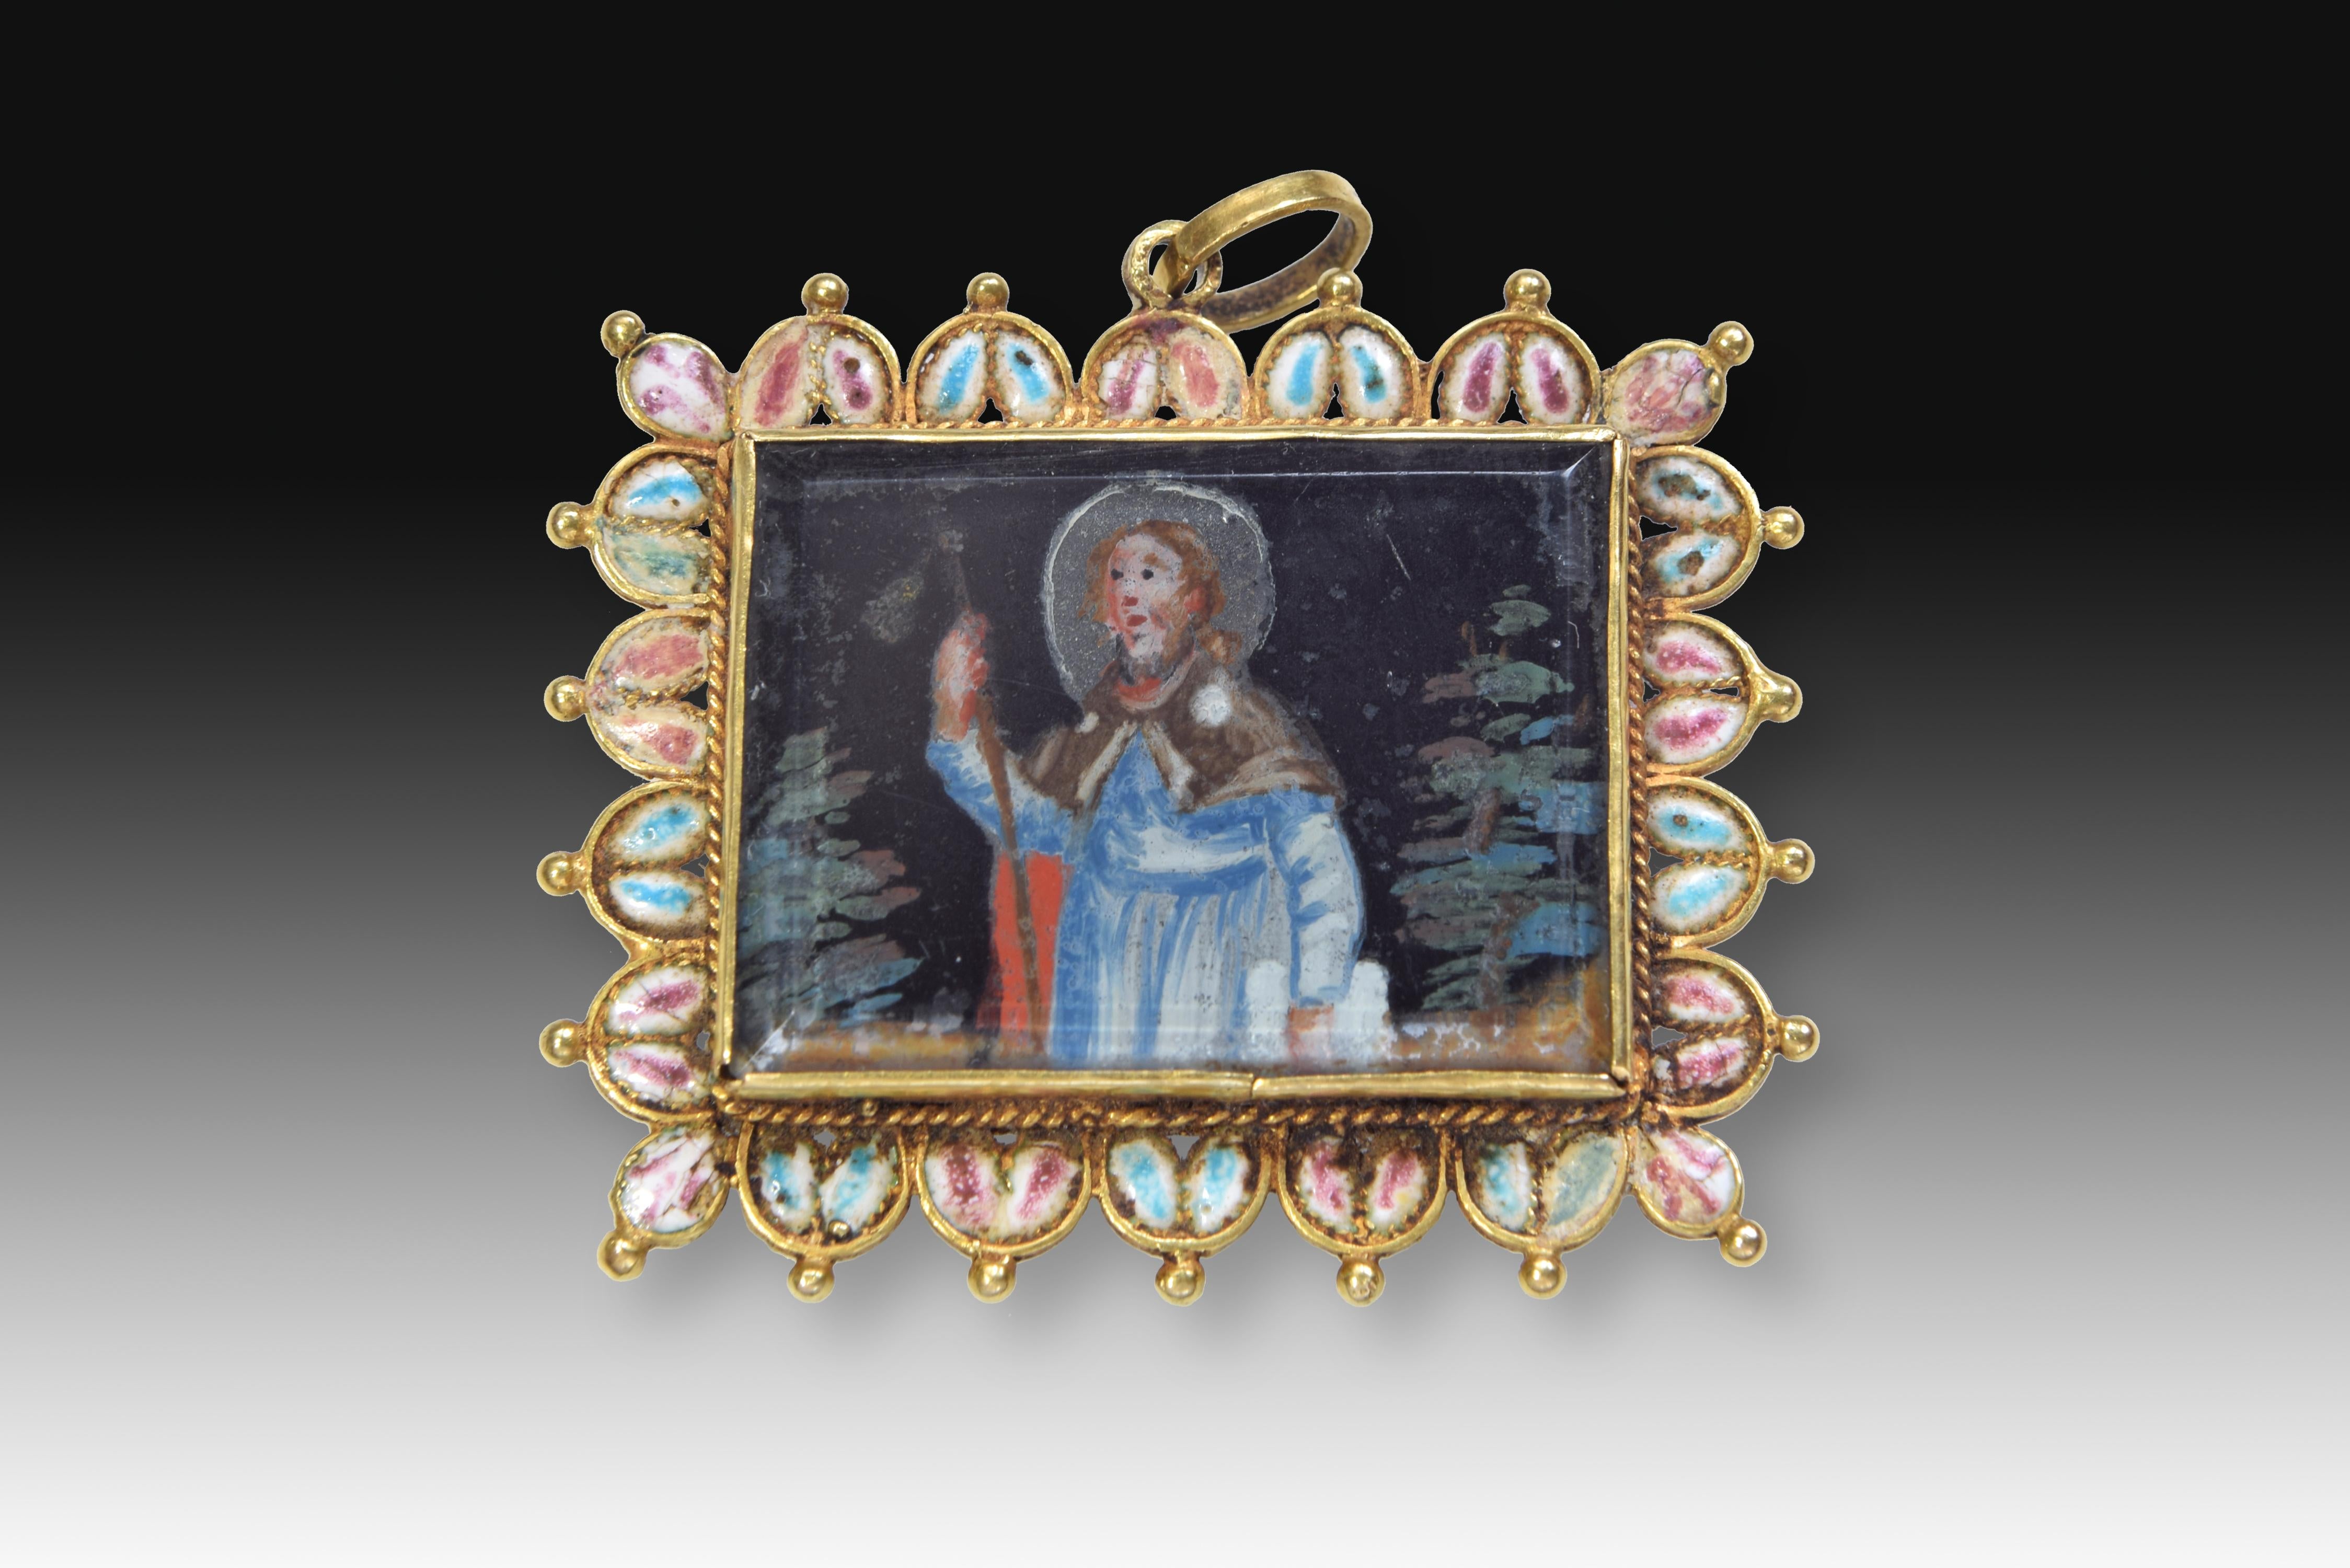 Devotional pendant or reliquary. Gold, enamel. Mallorca school, 17th century.
Devotional pendant or rectangular reliquary made of gold and enamels that has a simplified Annunciation on one side and a figure of Santiago Apóstol on the other. The